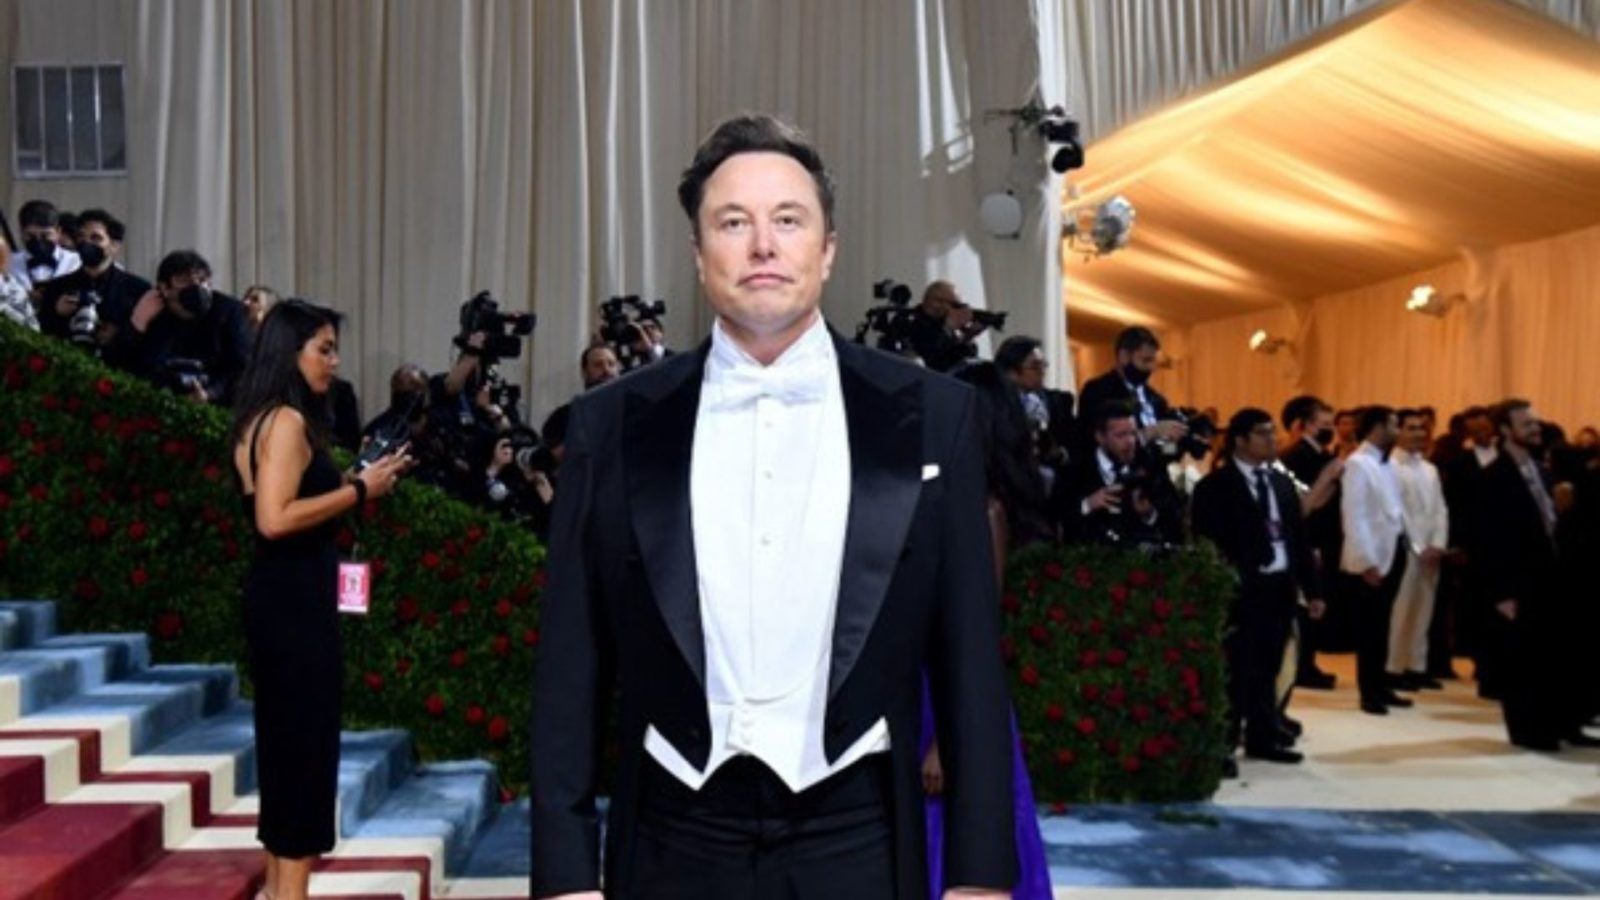 Elon Musk: Net worth and other businesses of the Tesla and SpaceX CEO